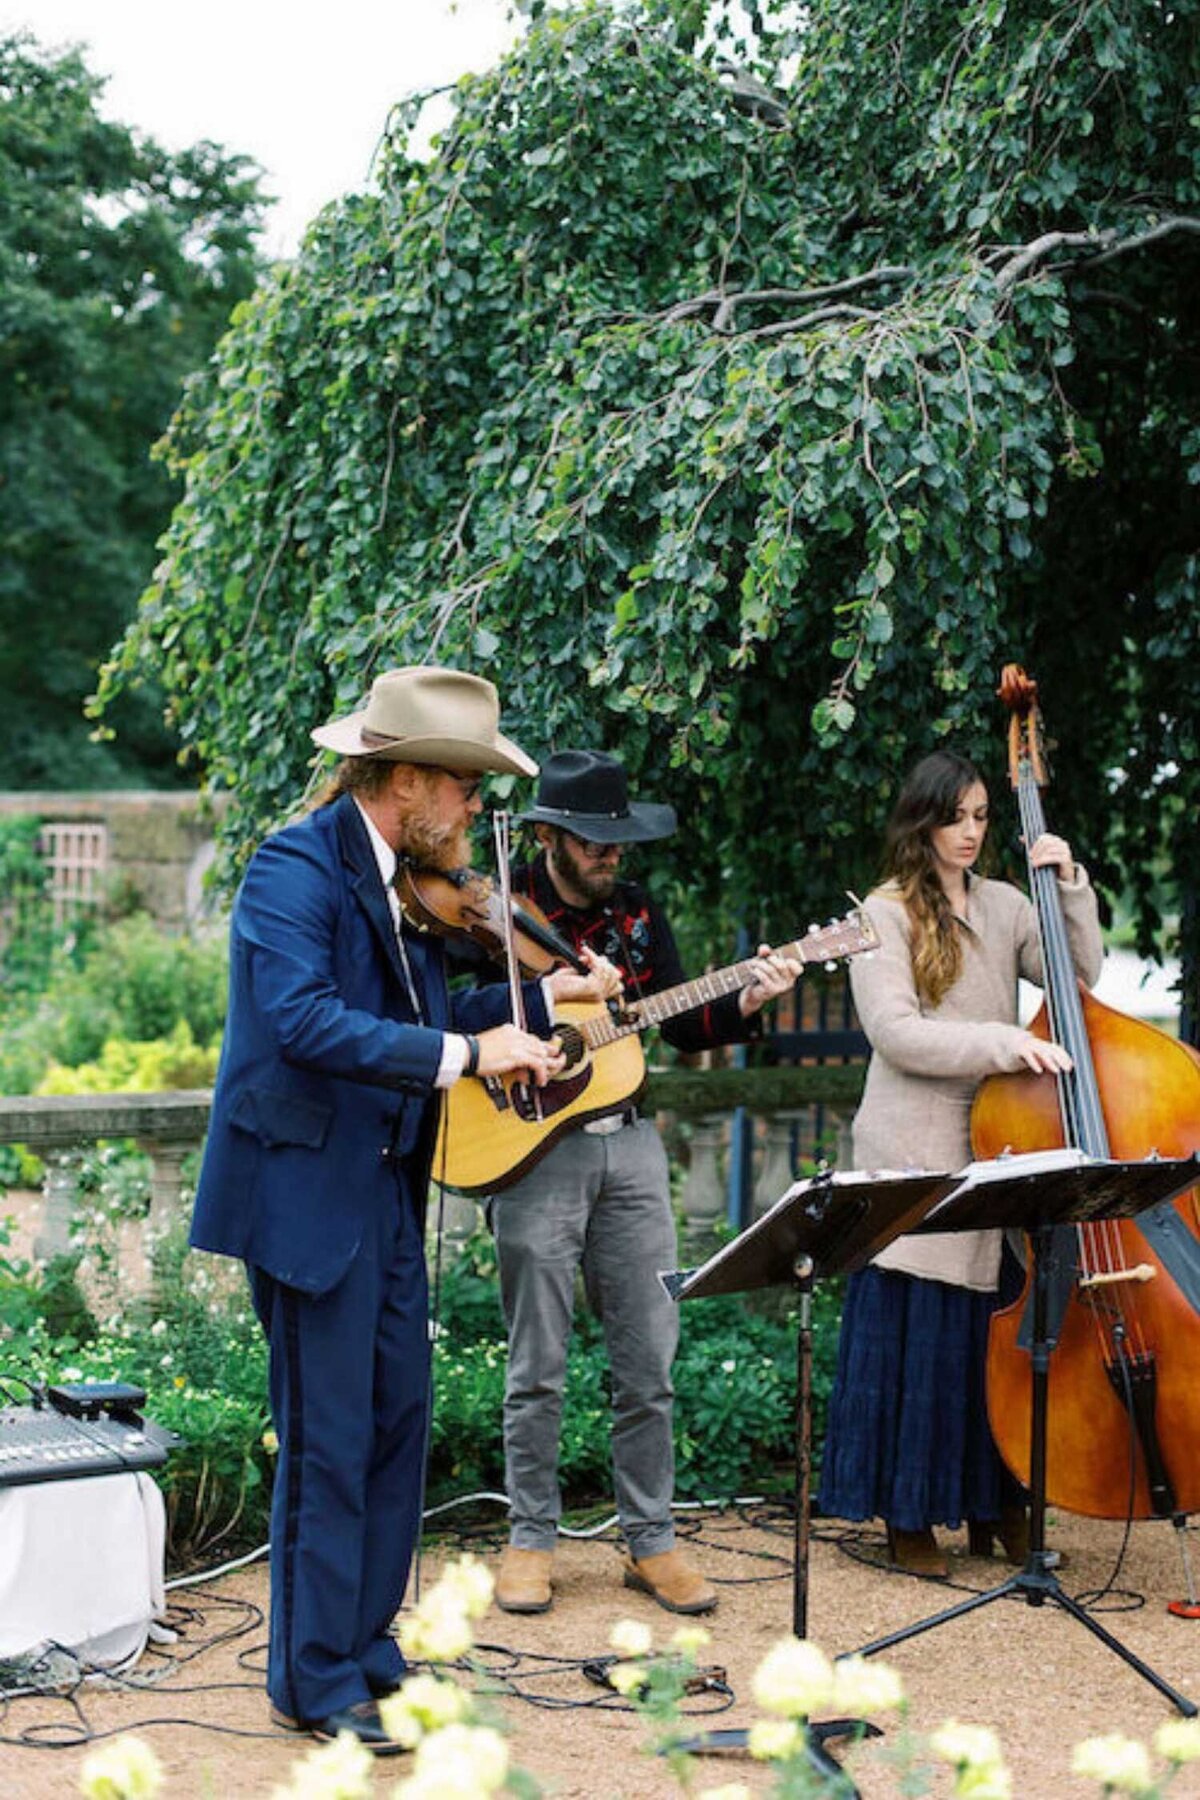 Bluegrass band plays before the ceremony at a luxury Chicago outdoor garden wedding.